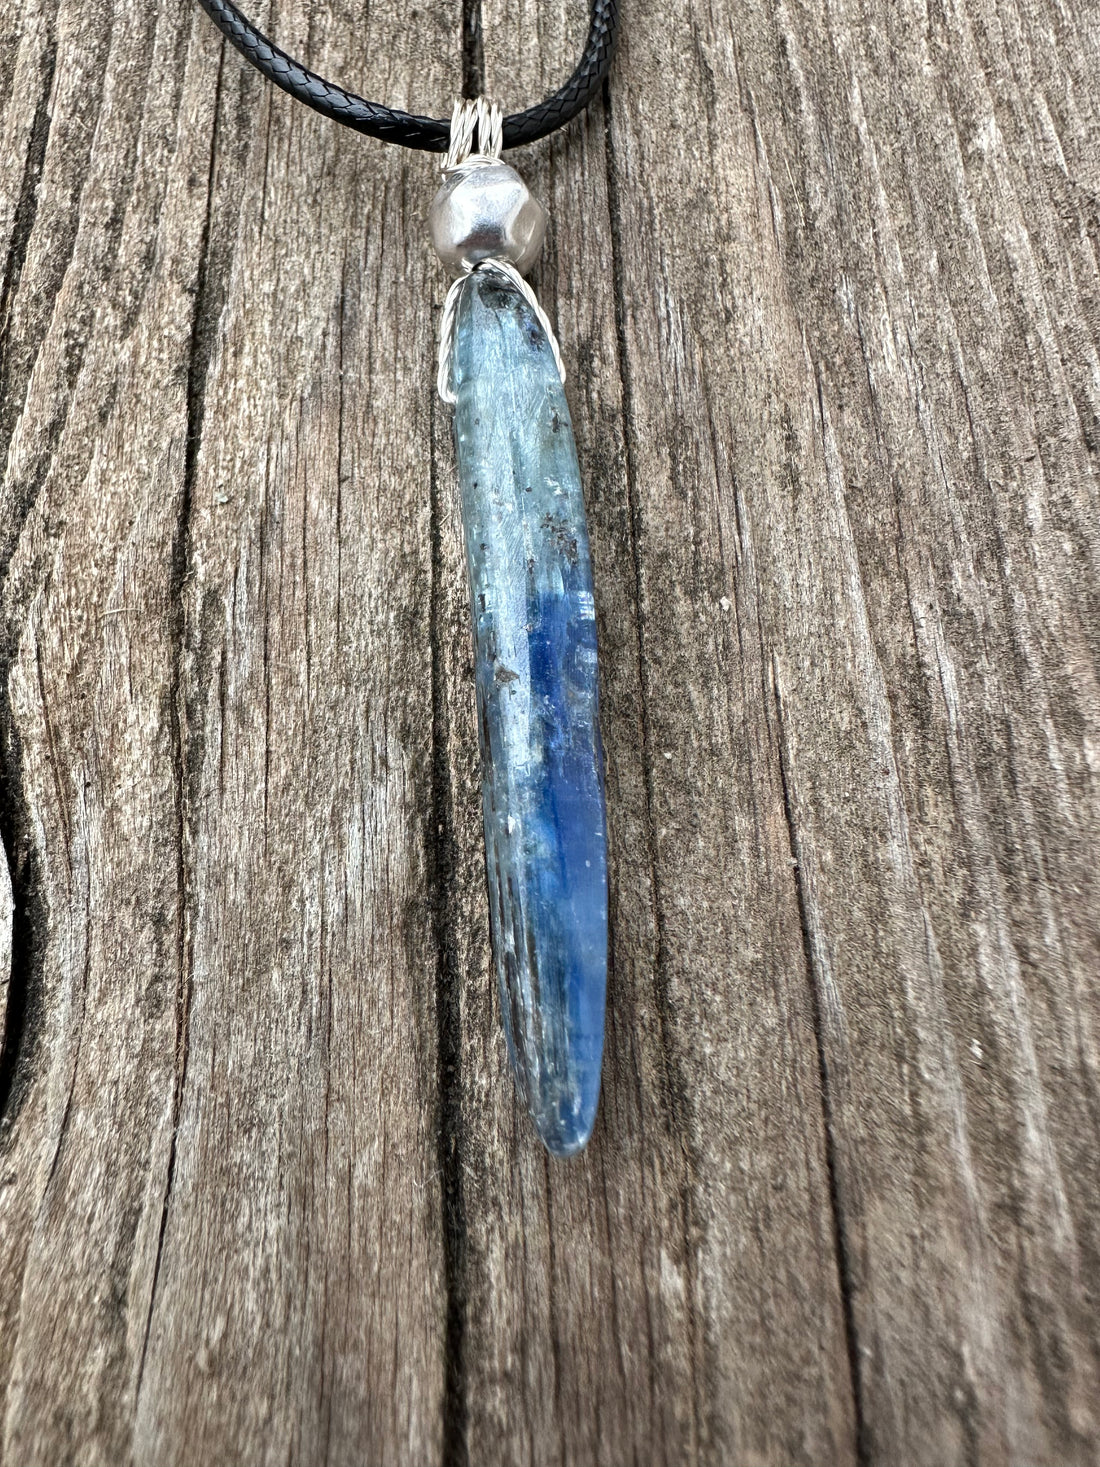 Blue Kyanite for Opening Chakras and Release.